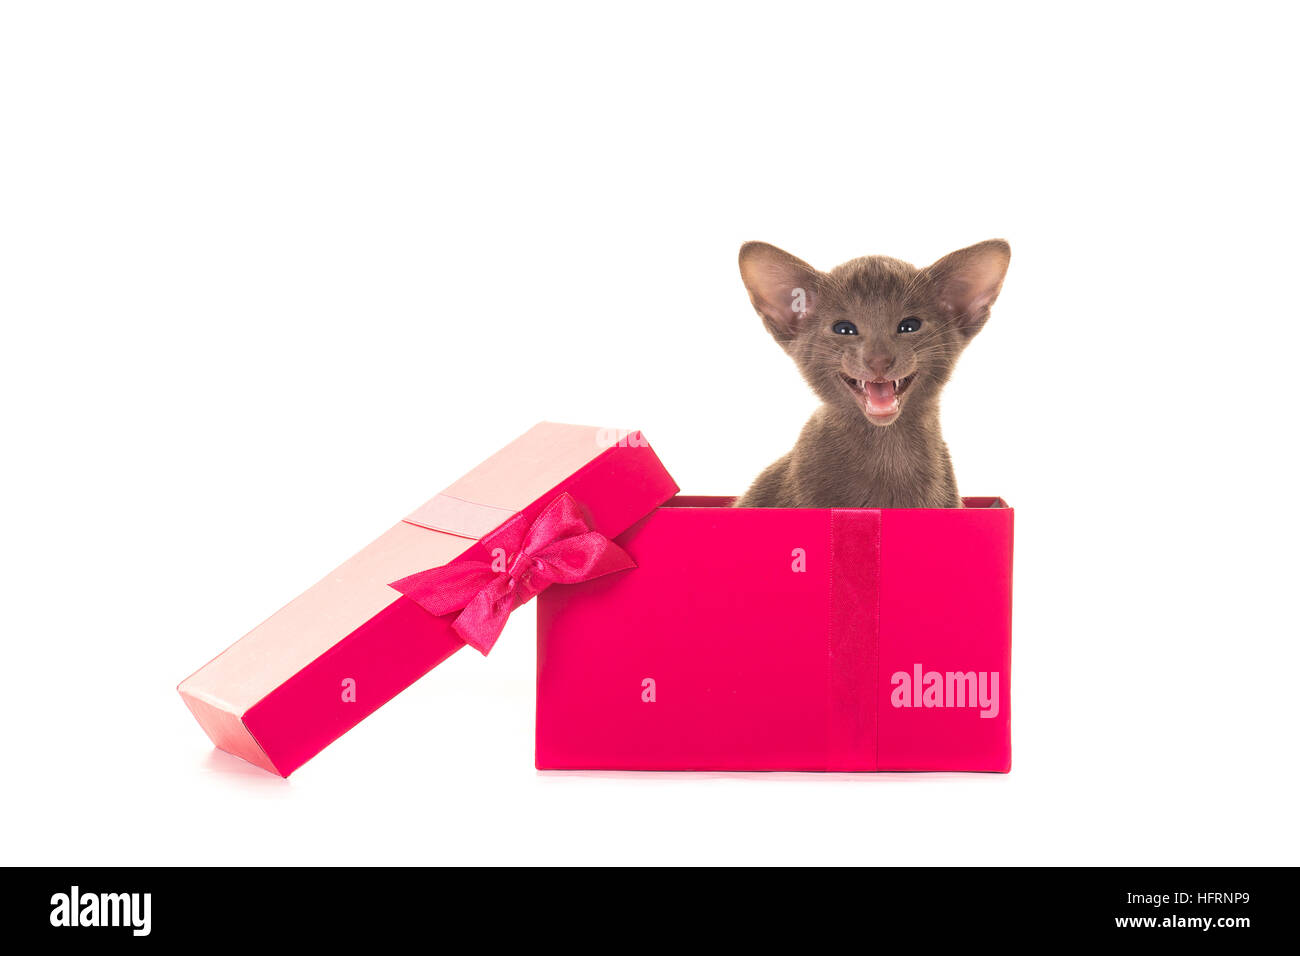 Cute grey singing speaking siamese kitten cat in a pink present box isolated on a white background Stock Photo